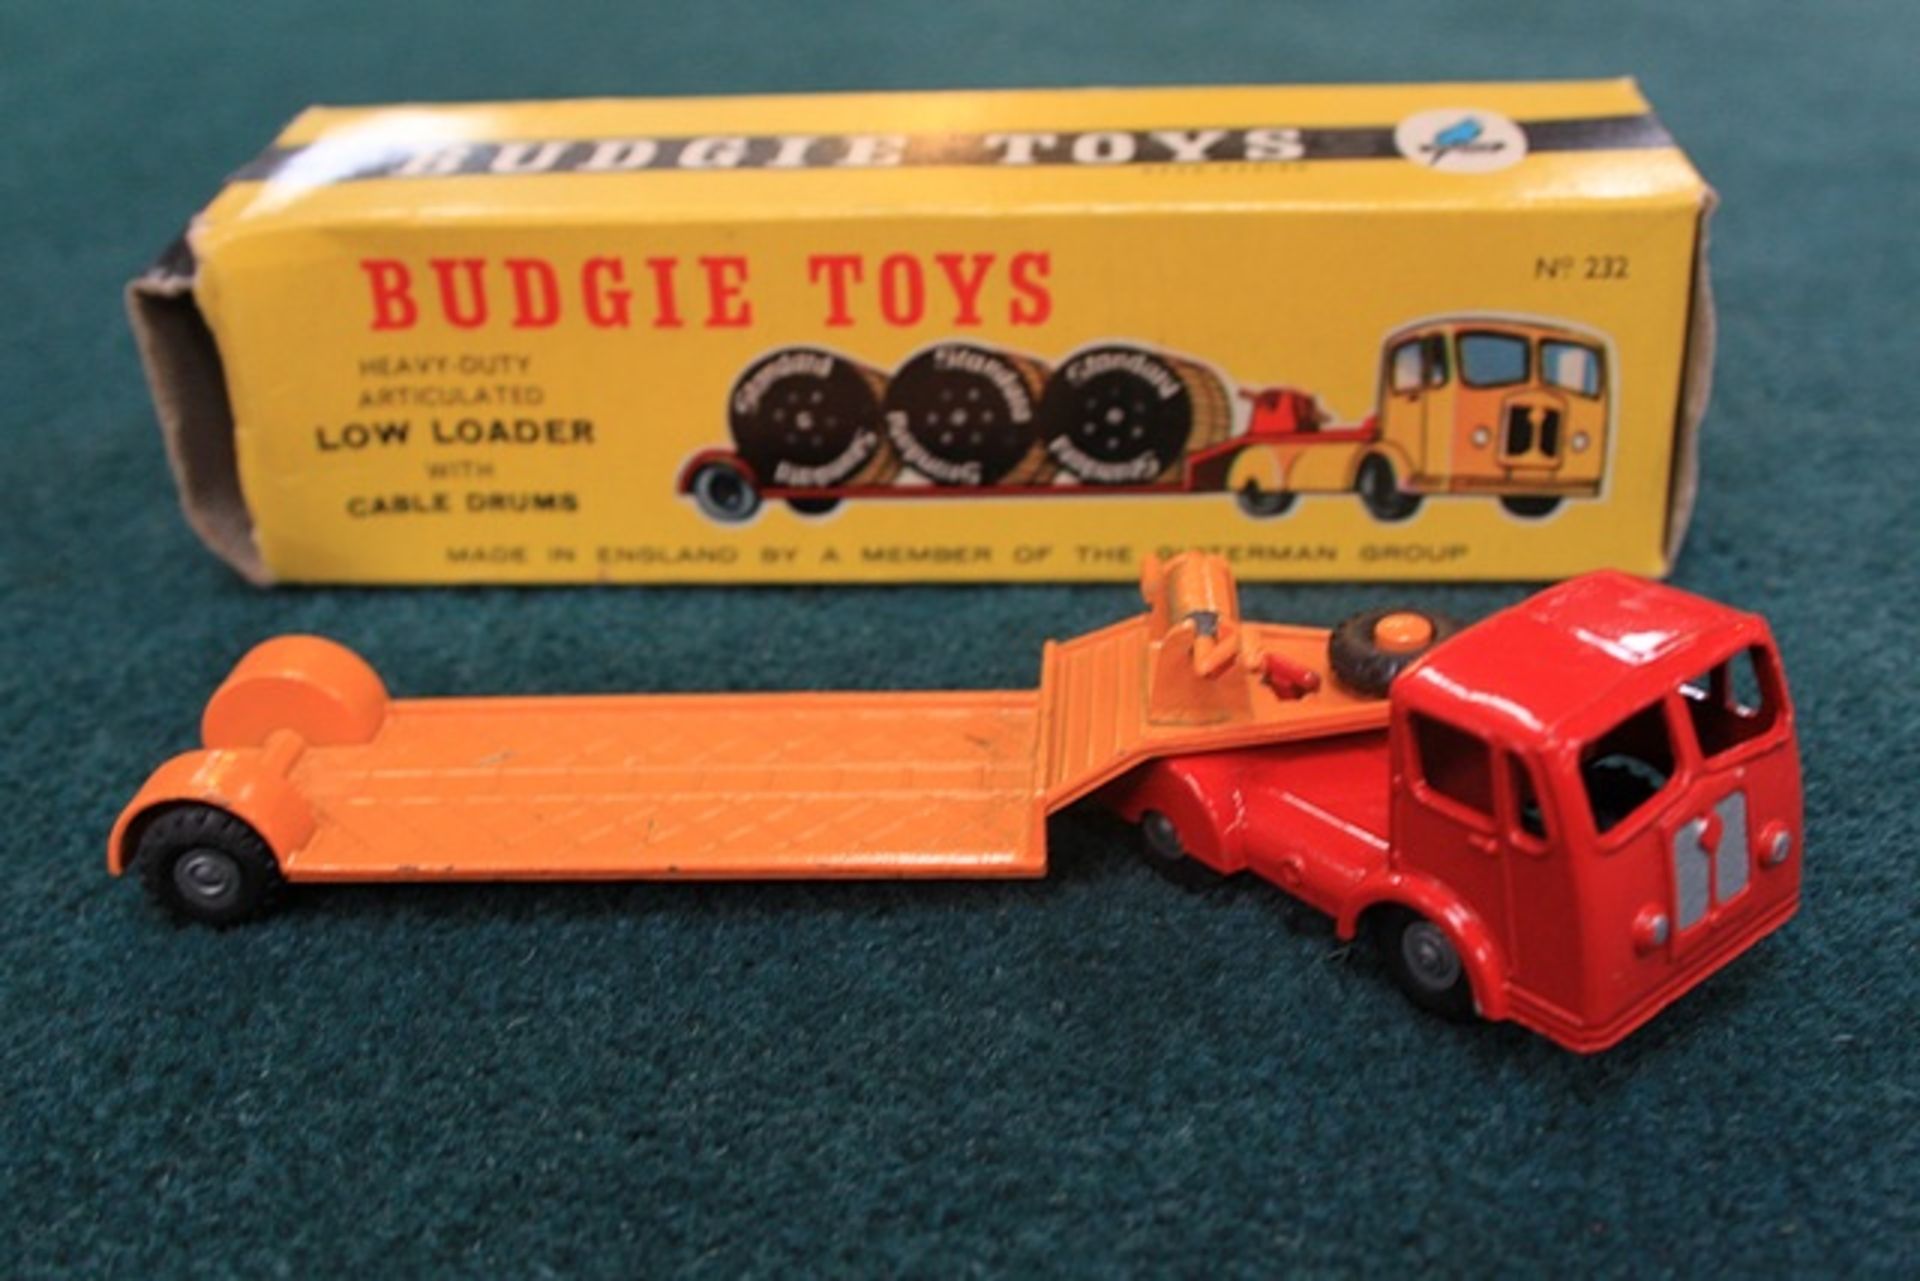 Budgie Diecast # 232 Heavy Duty Articulated Lowe Loader (Without Cable Drums) Complete With Box - Image 2 of 2